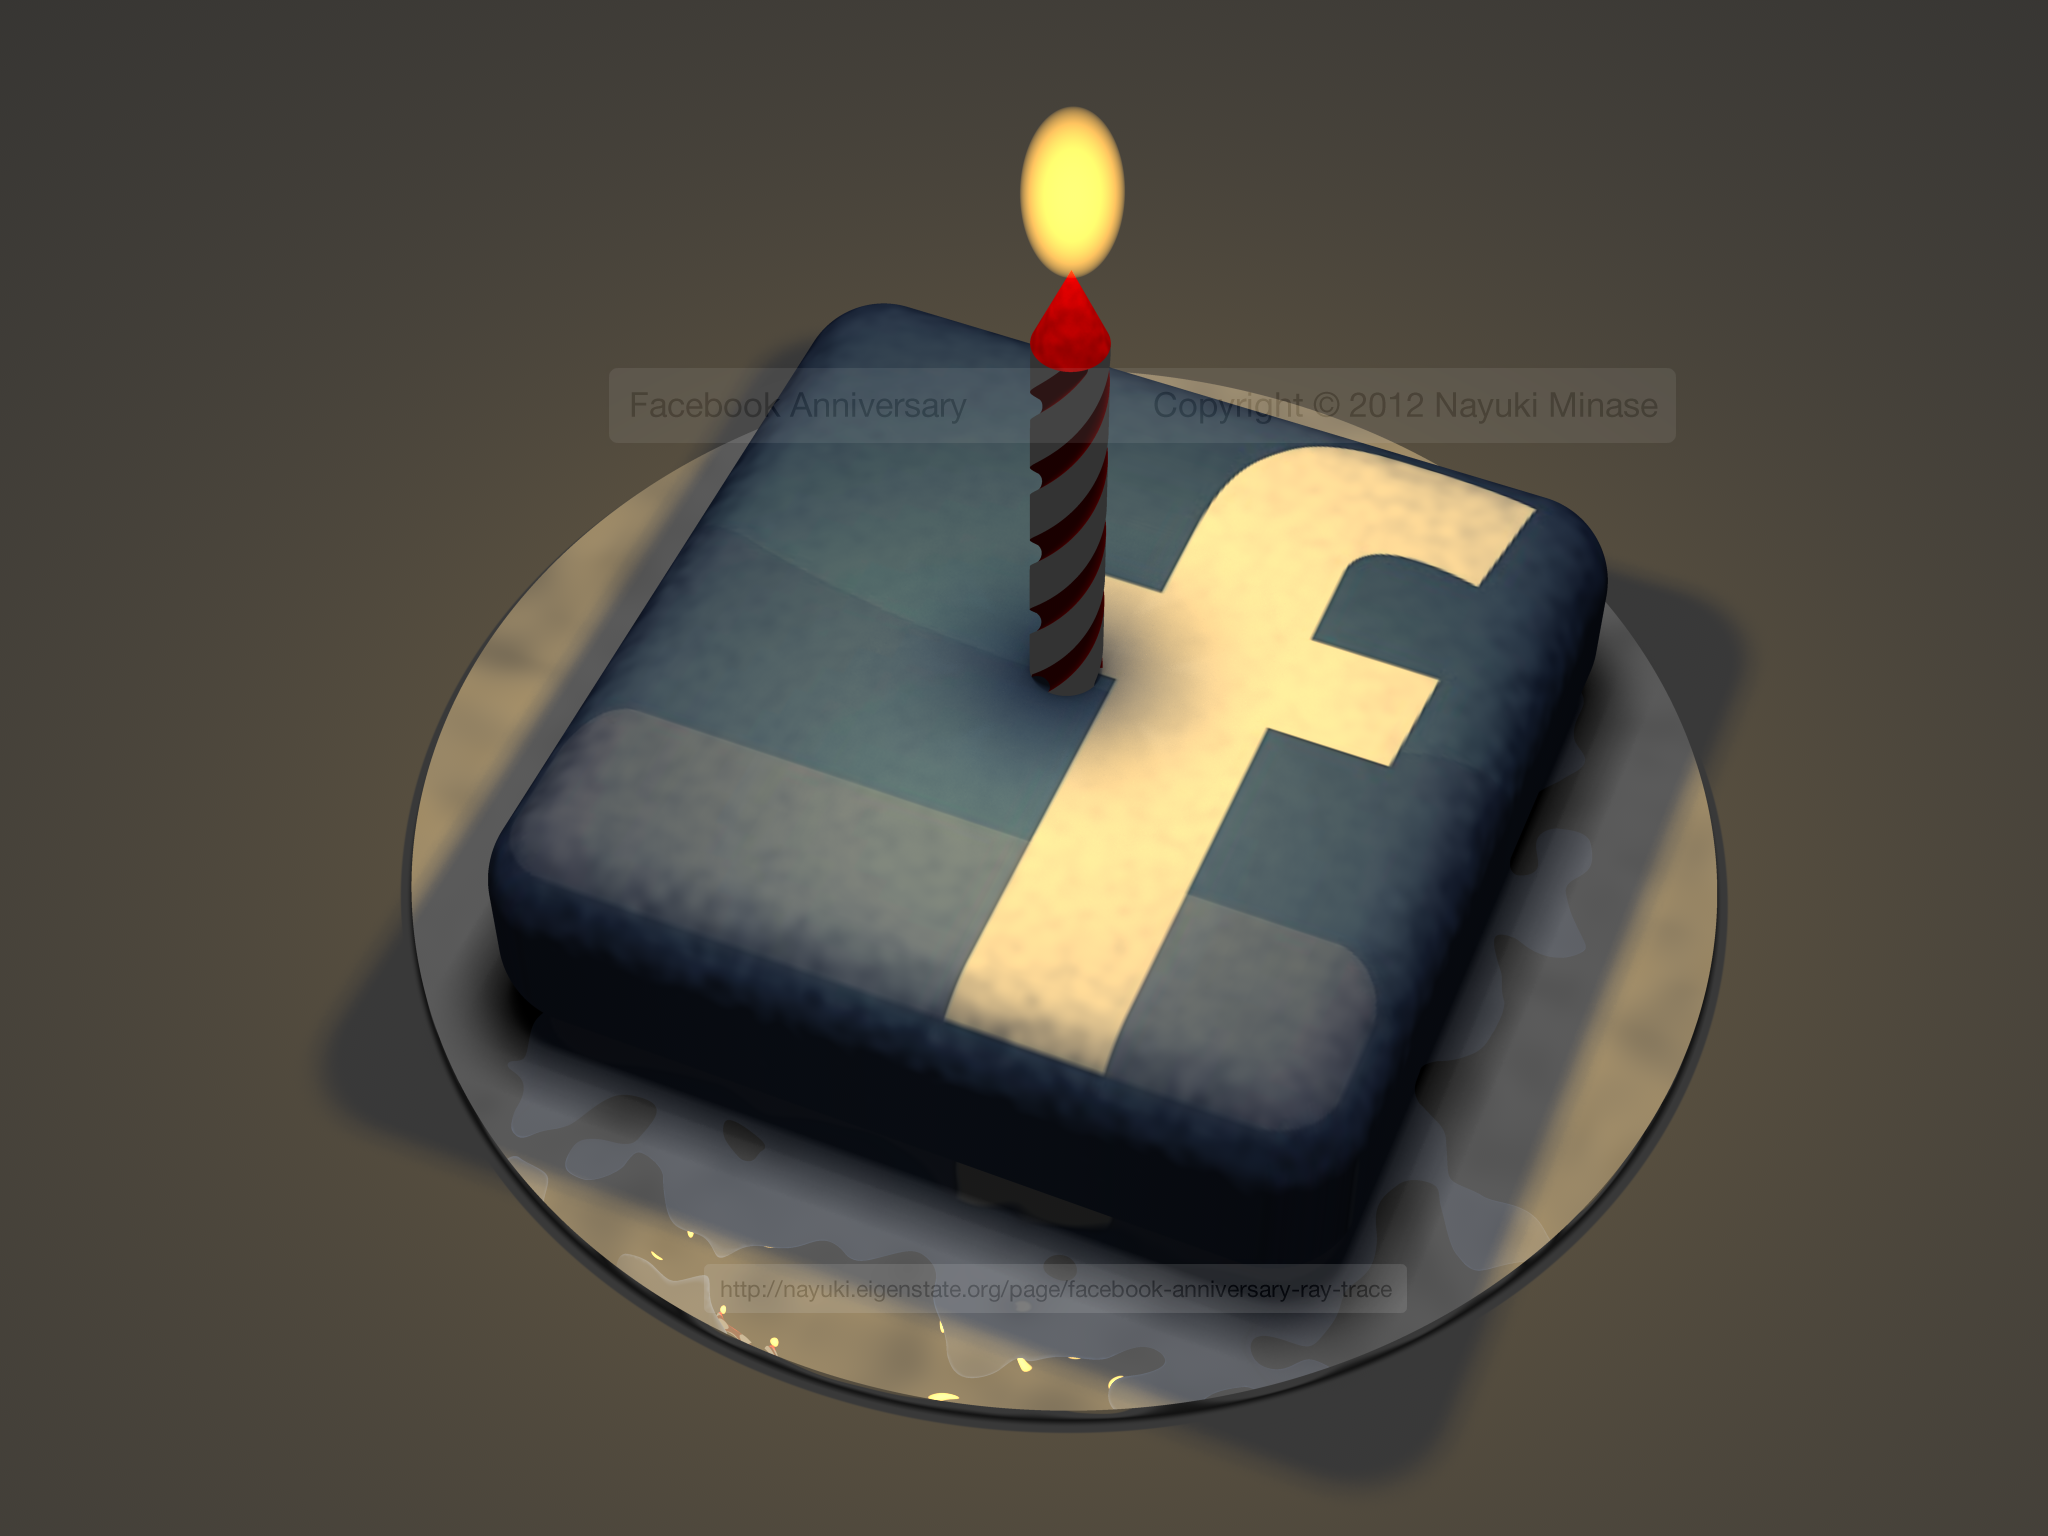 Birthday Cake Images For Facebook